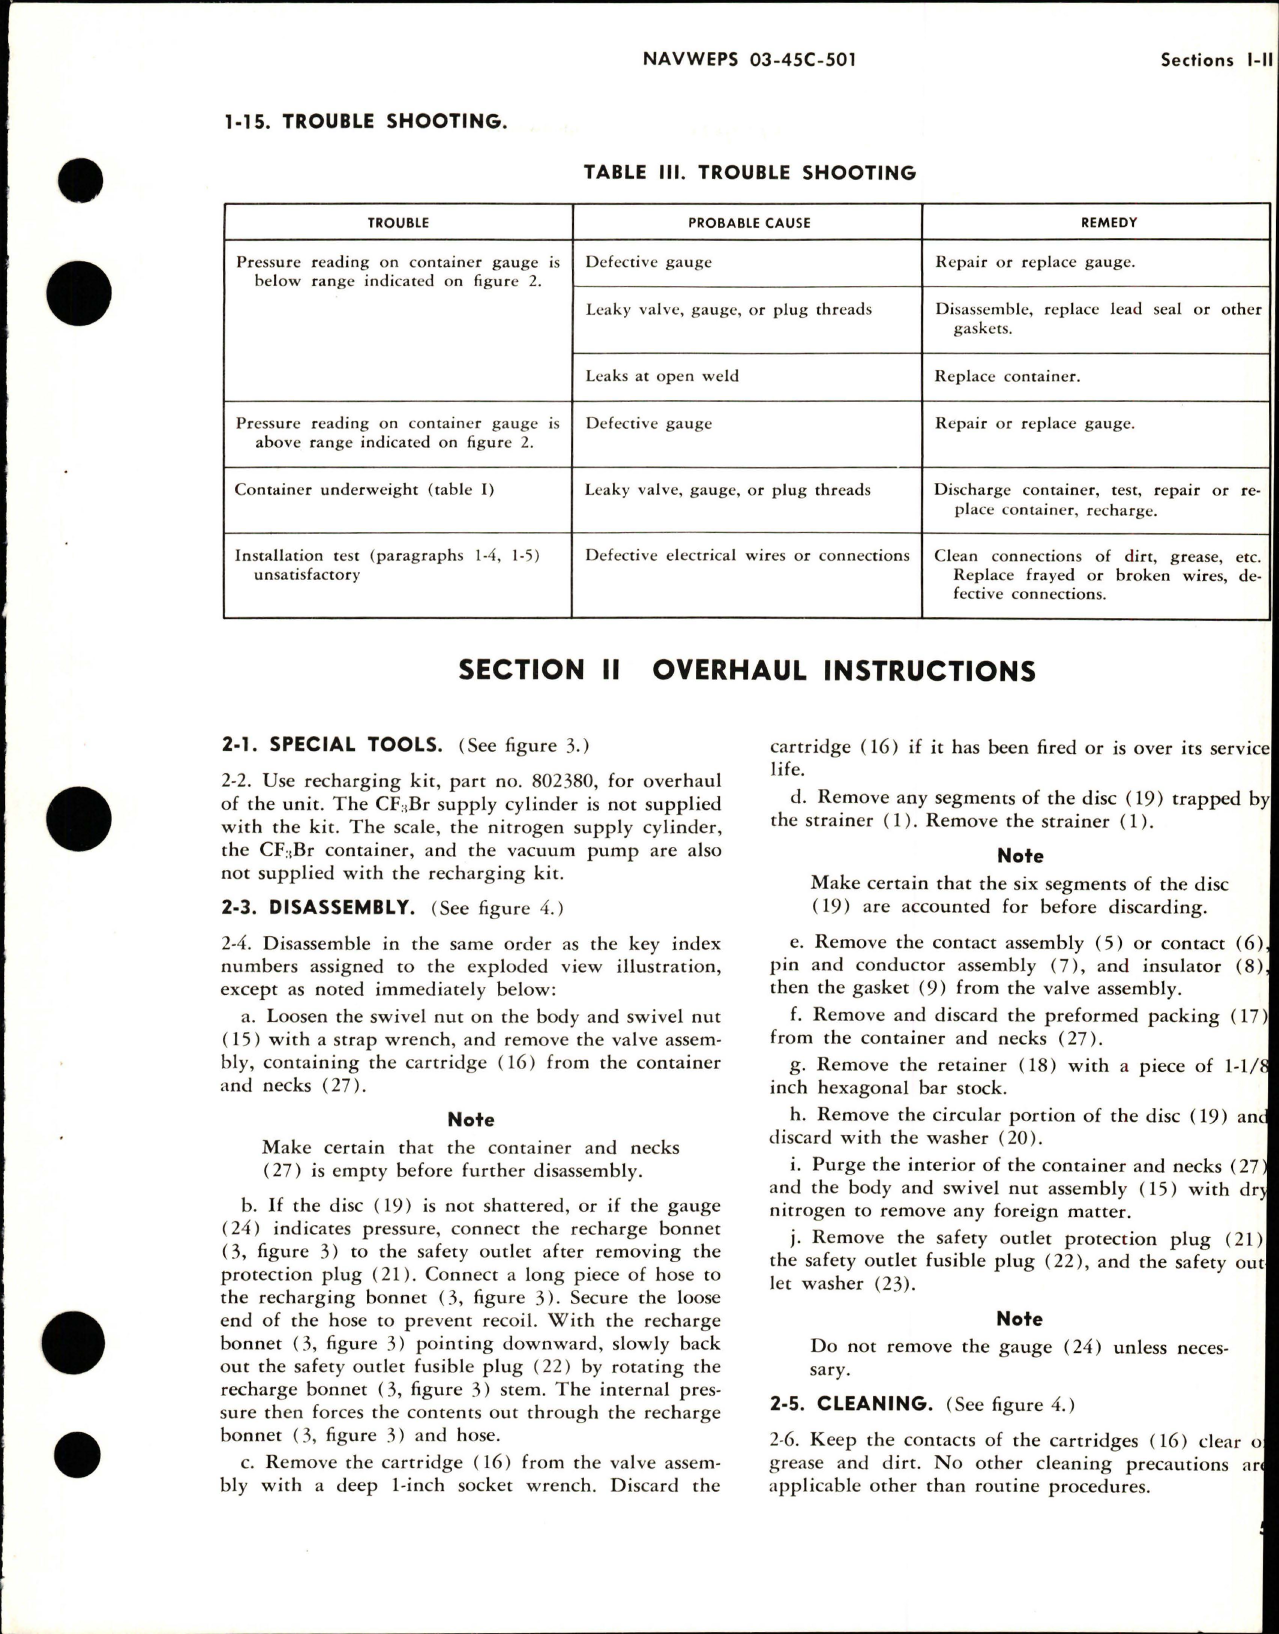 Sample page 5 from AirCorps Library document: Operation, Service and Overhaul Instructions with Parts Breakdown for CF3Br Container, Valve and Cartridge Assemblies